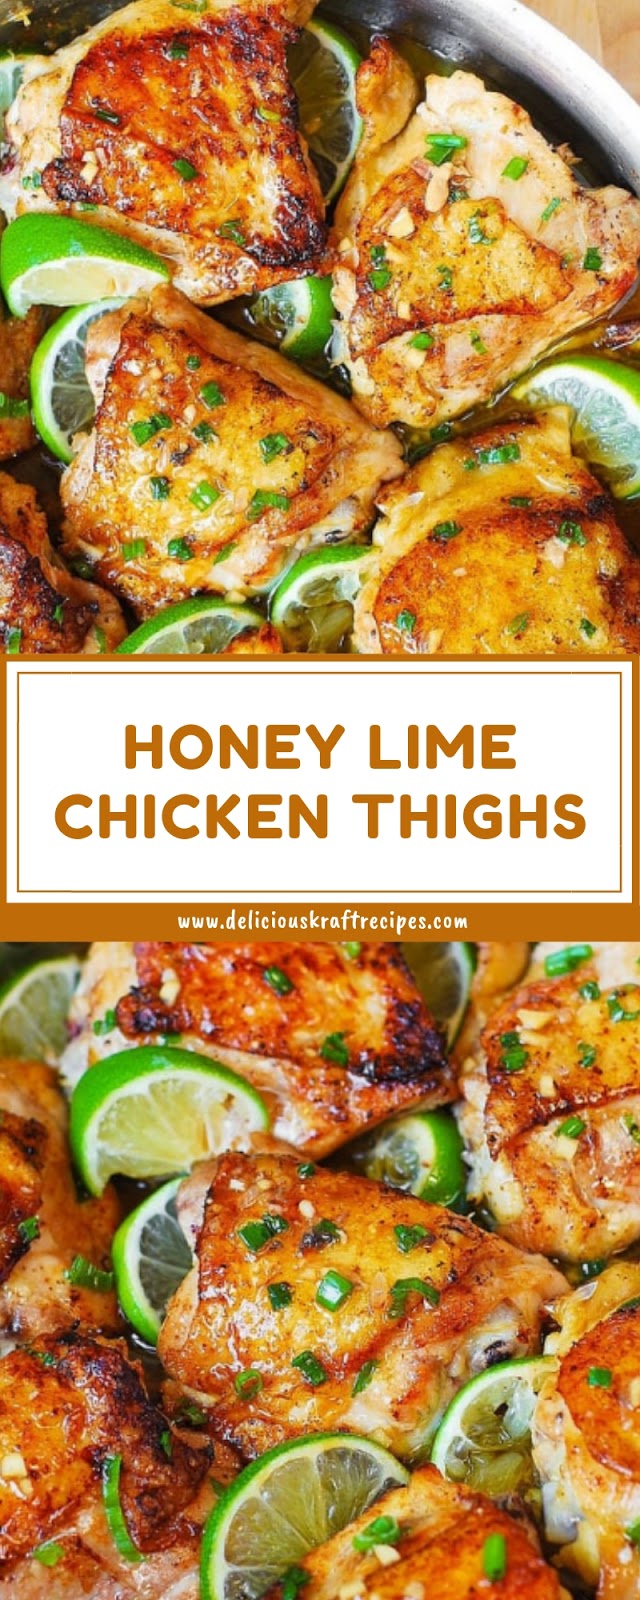 HONEY LIME CHICKEN THIGHS